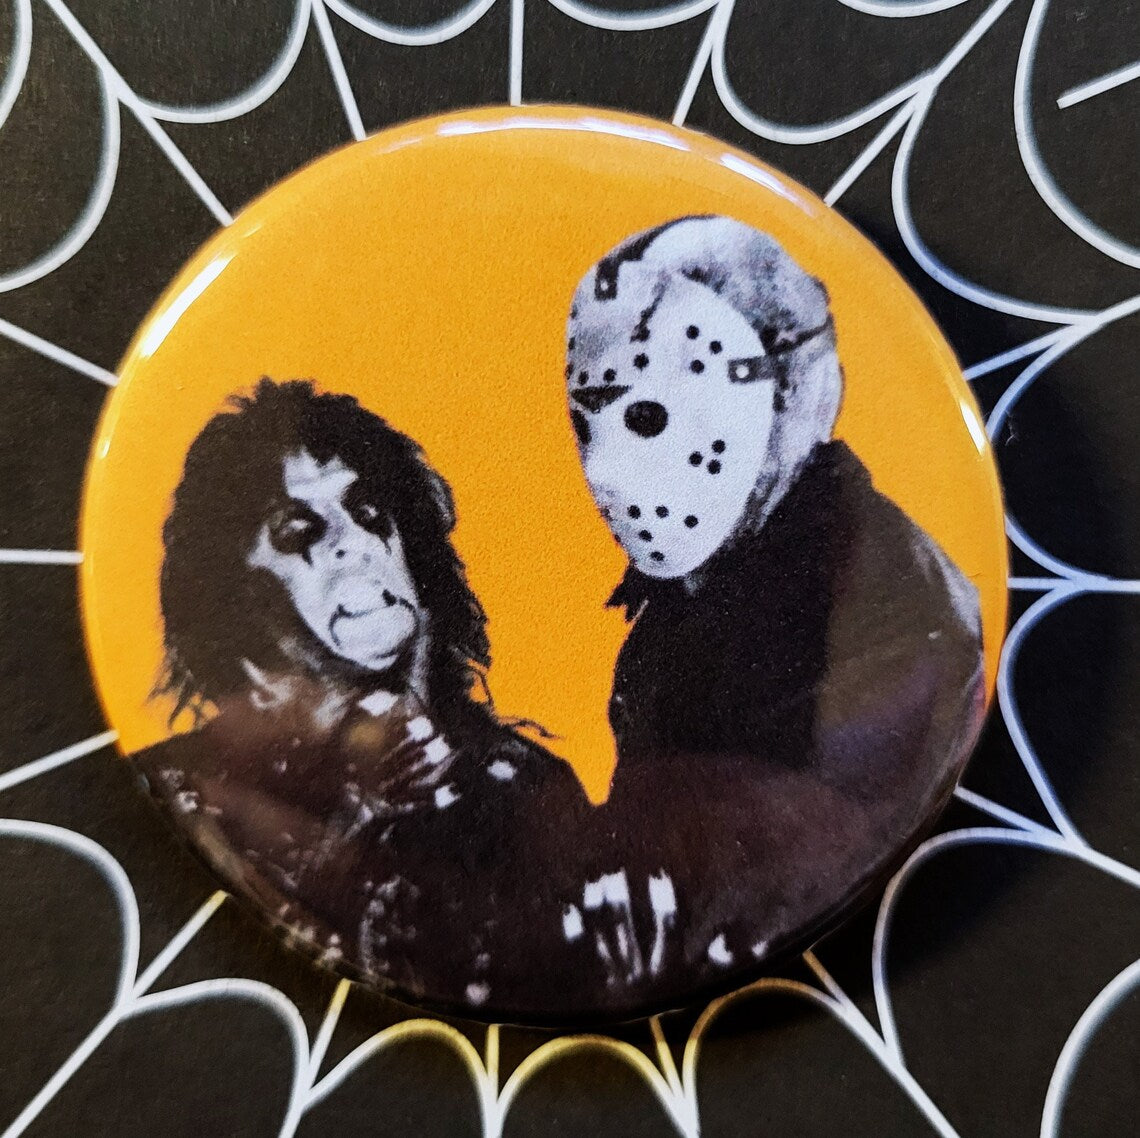 Alice Cooper pinback Buttons and Bottle Openers.